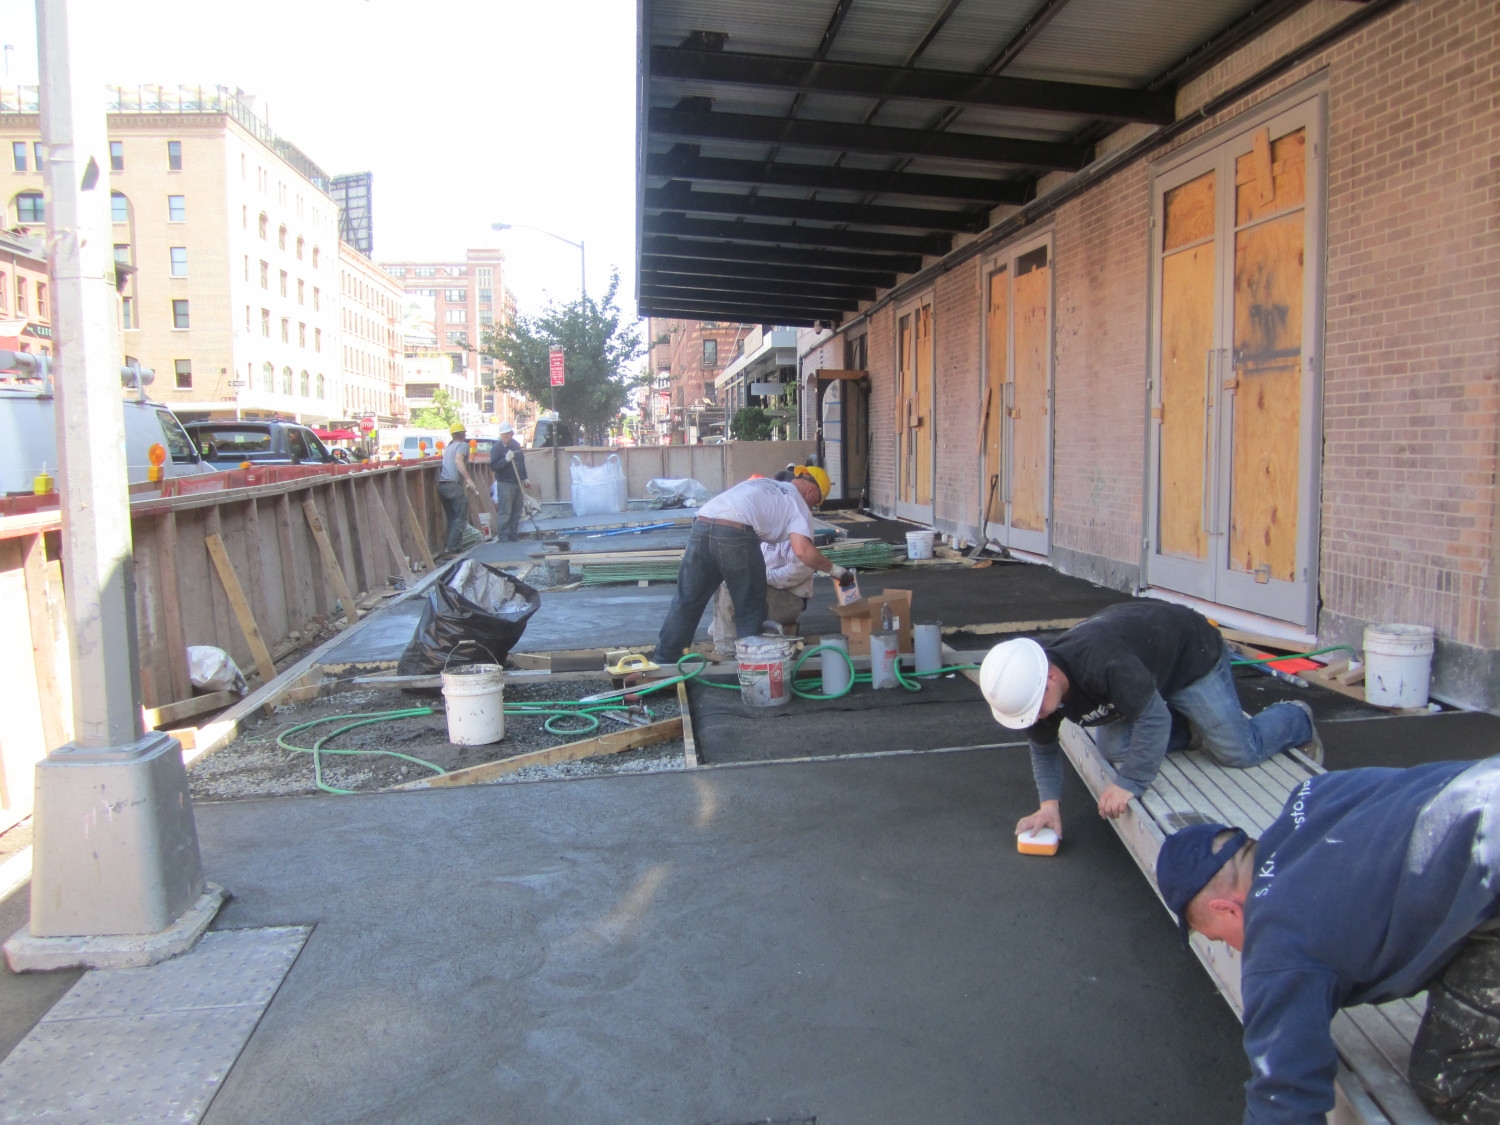 Street view of the completed sidewalk at 5 Little West 12th Street in Manhattan, where Jepol Construction applied a concrete topping slab for the final finish, showcasing the company's expertise in concrete work and waterproofing basement surfaces.